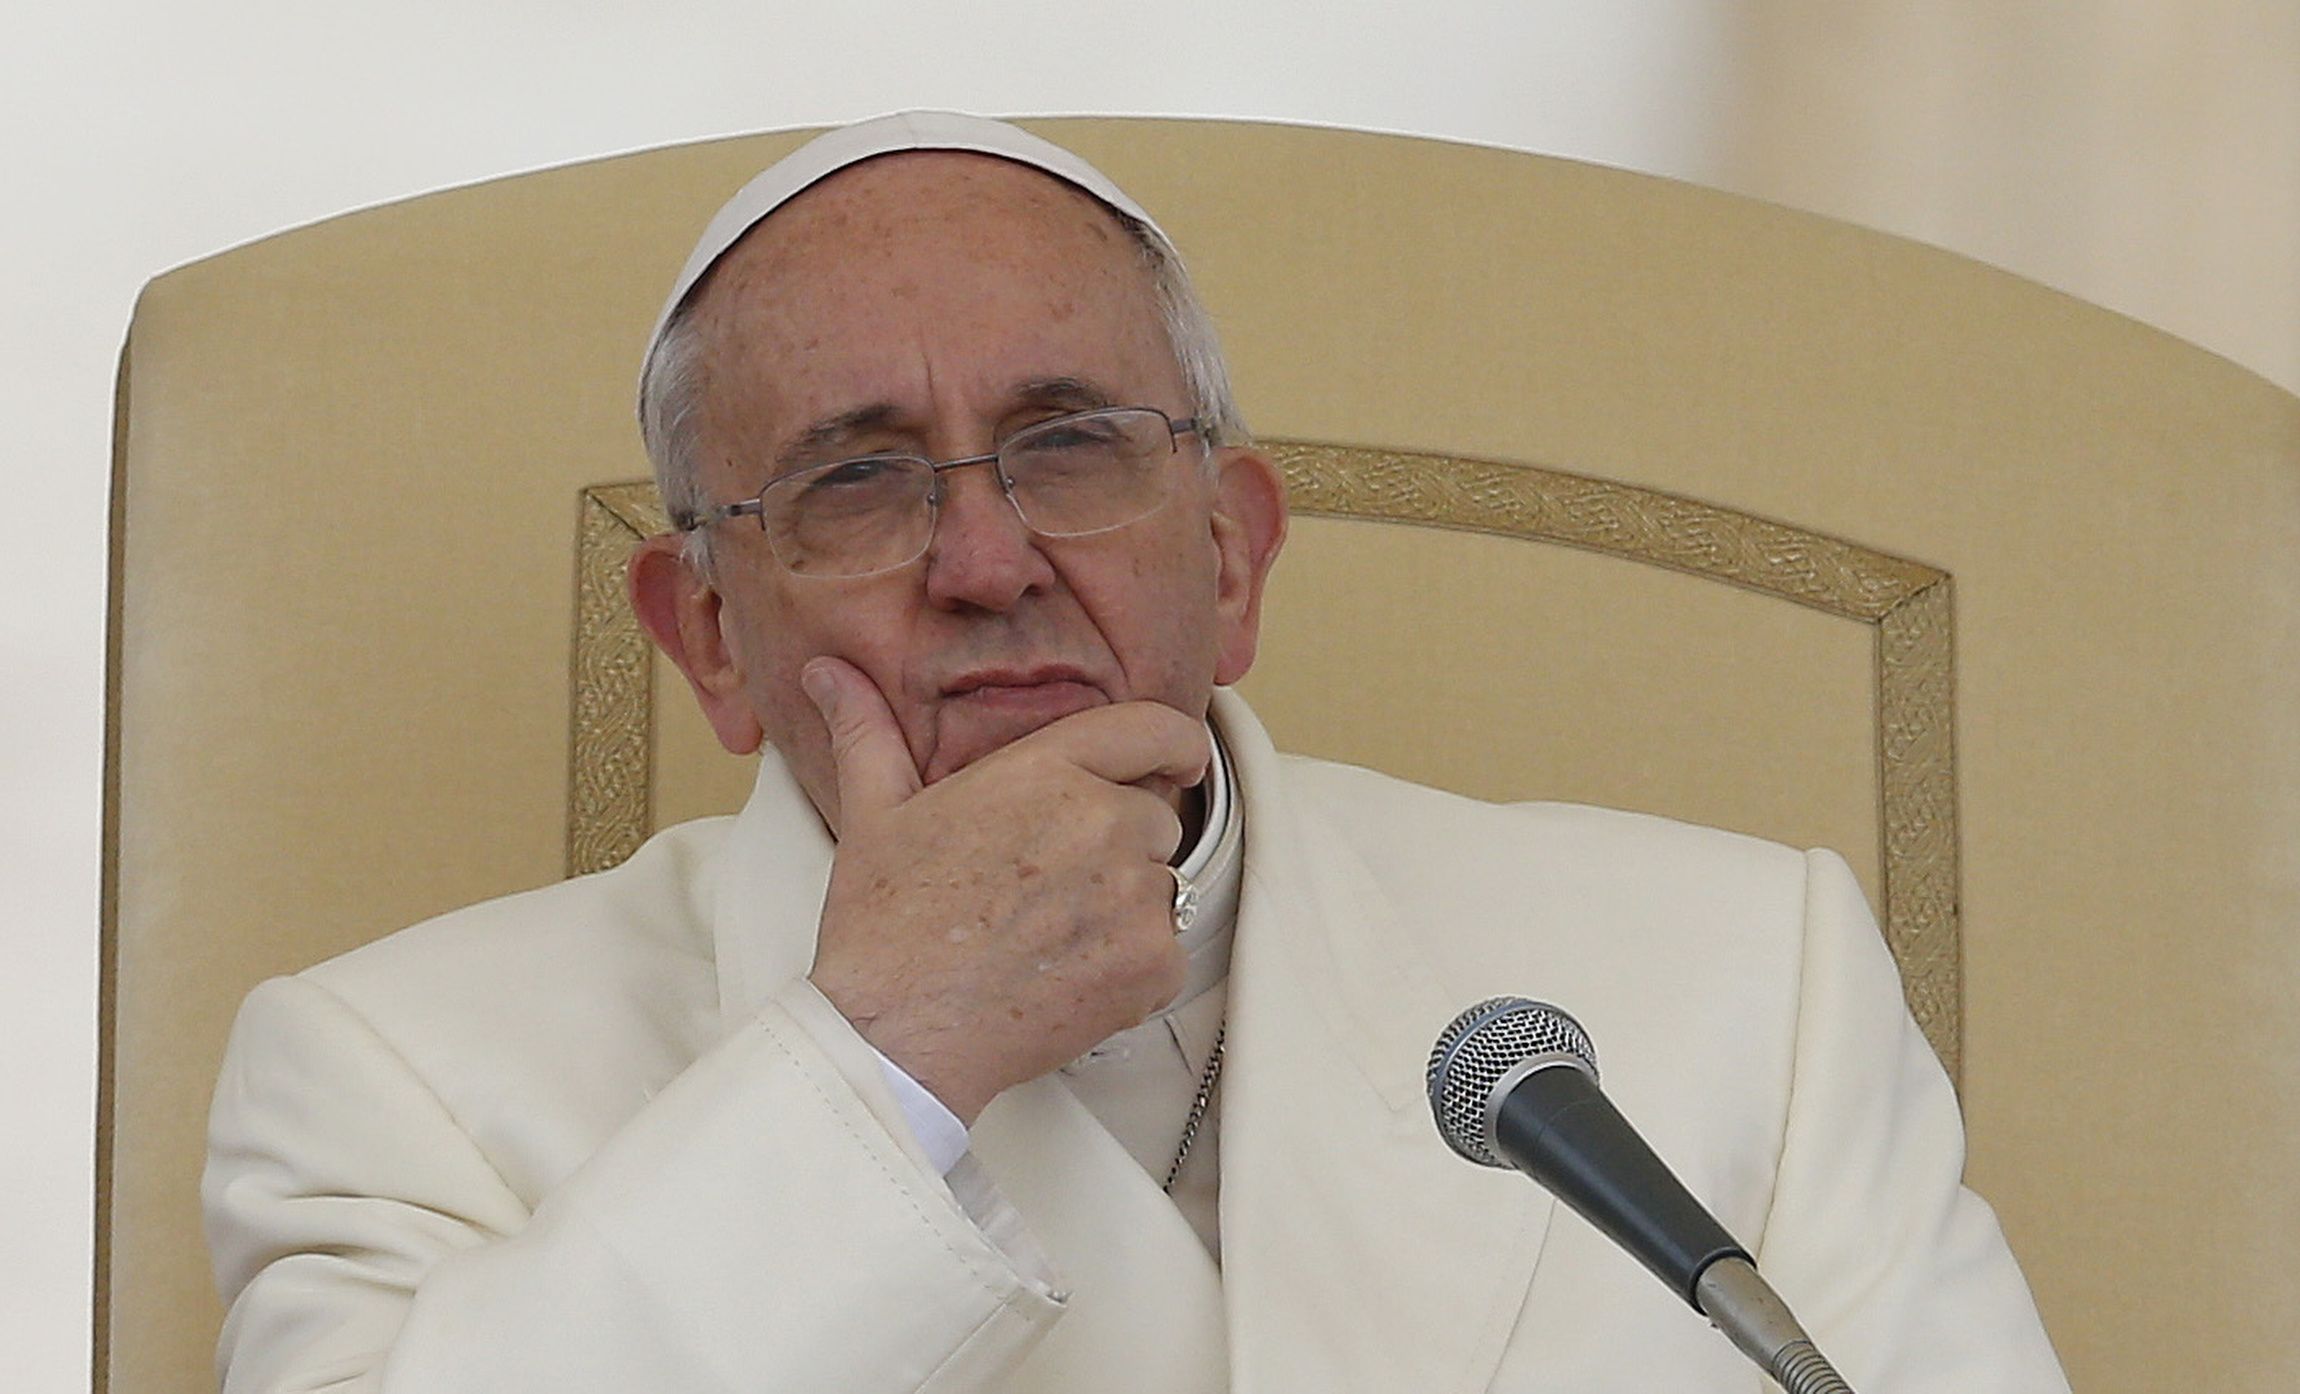 Pope Francis looks out at St. Peters Square during weekly audience (CNS photo)